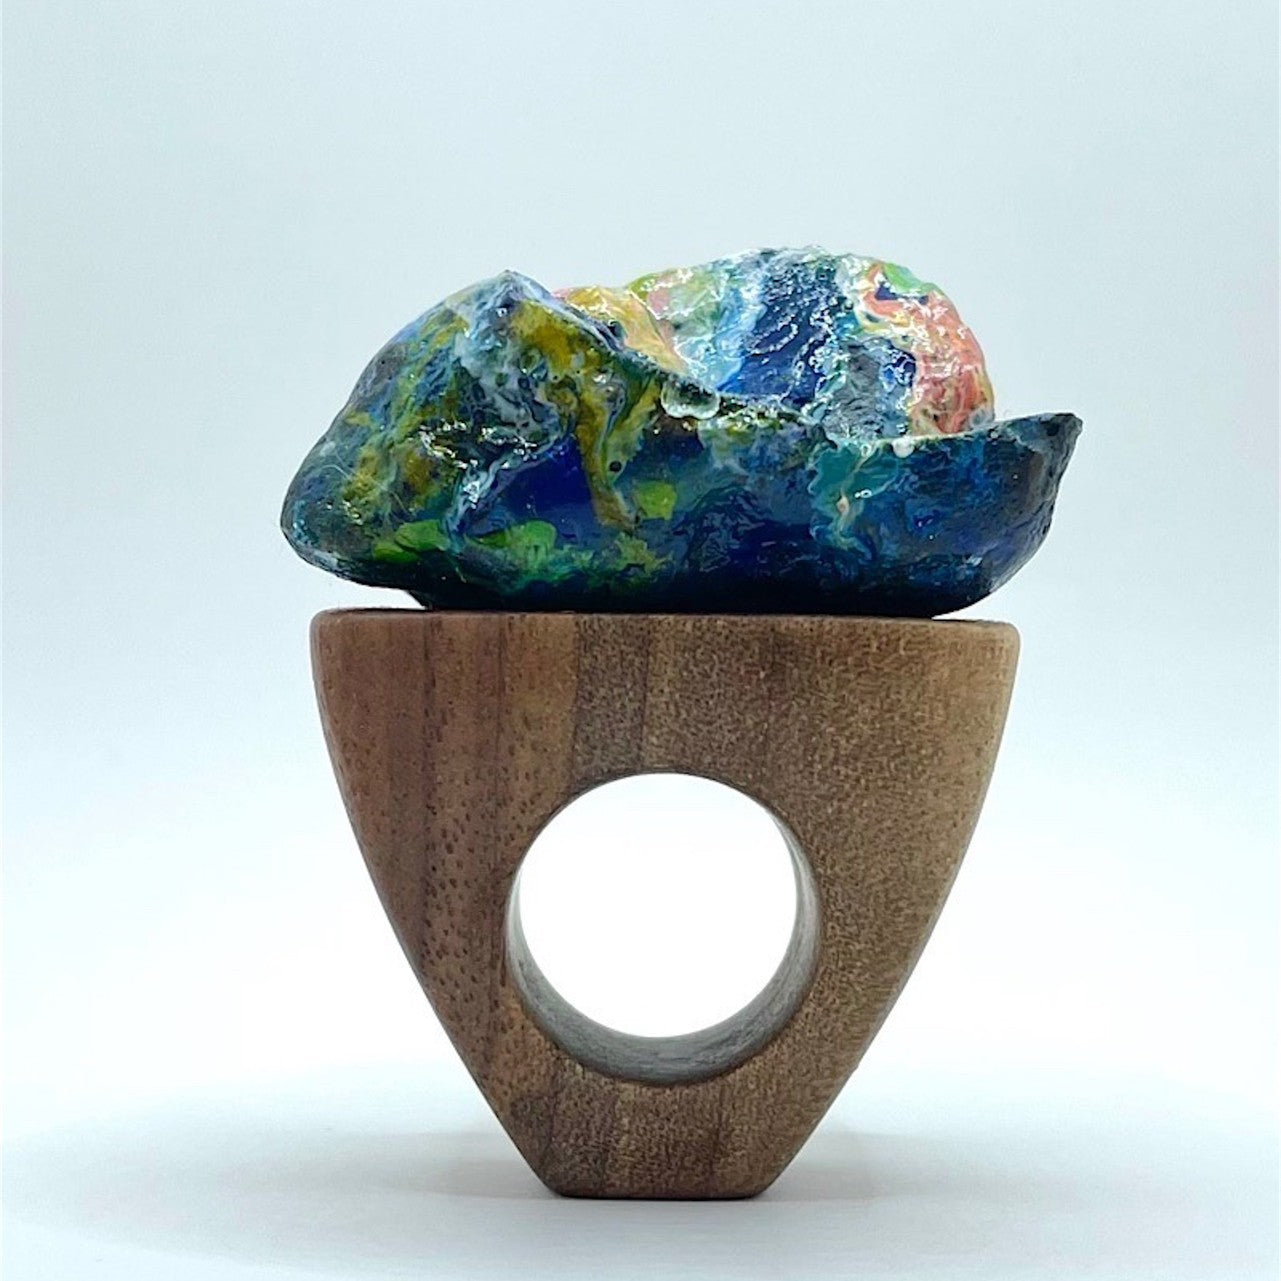 【PAIGE MARTIN】PAINTED ROCK RING4